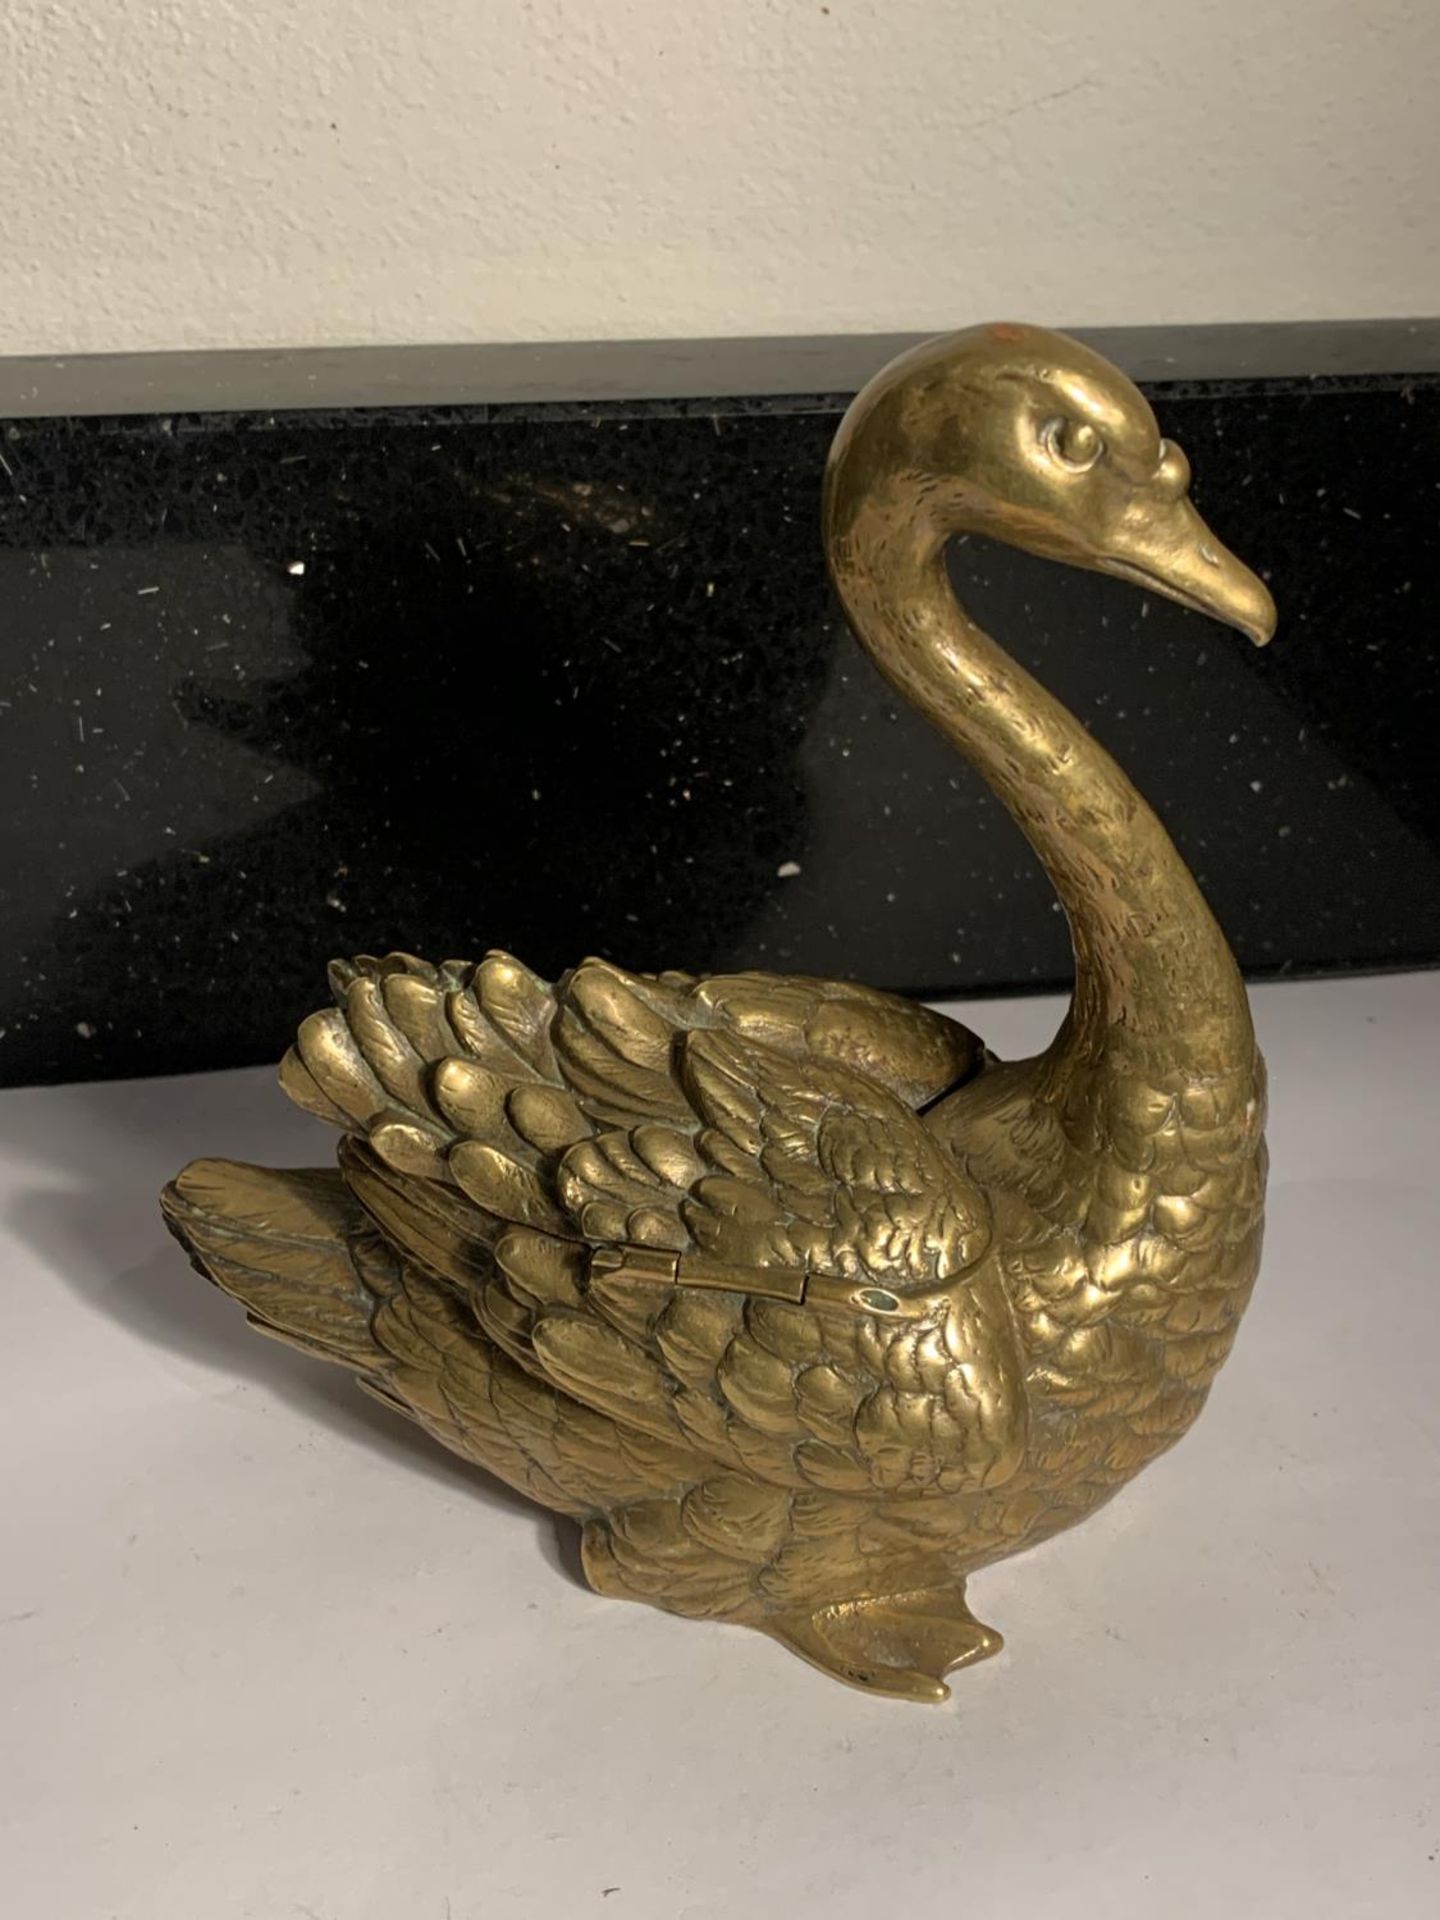 A GERMAN BRASS INKWELL GESCHUTZTN 1101 IN THE STYLE OF A SWAN - Image 2 of 4